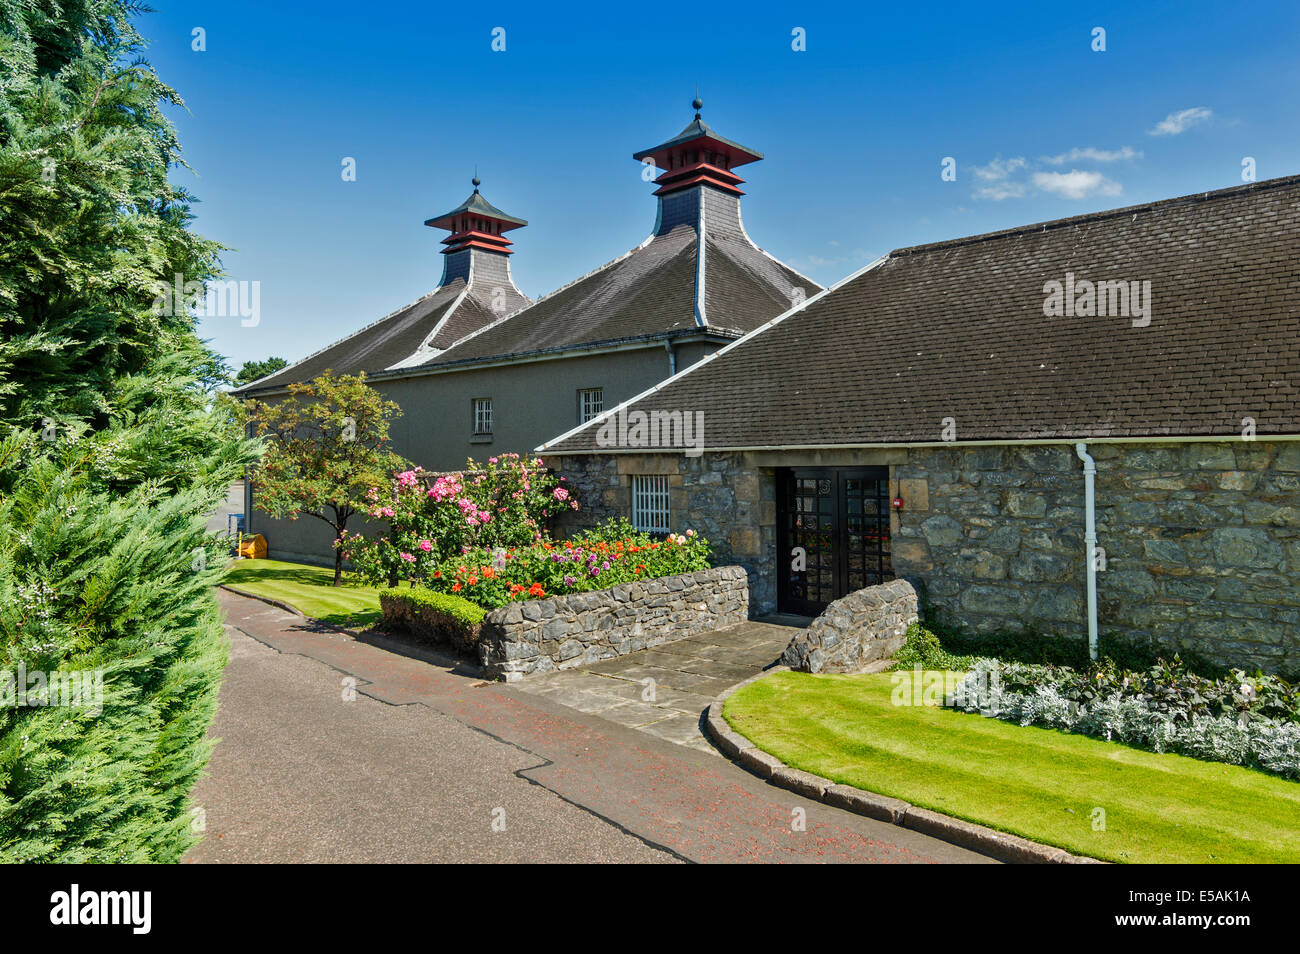 GLENFIDDICH WHISKY DISTILLERY DUFFTOWN SCOTLAND TYPICAL WAREHOUSE AND FLOWERS Stock Photo